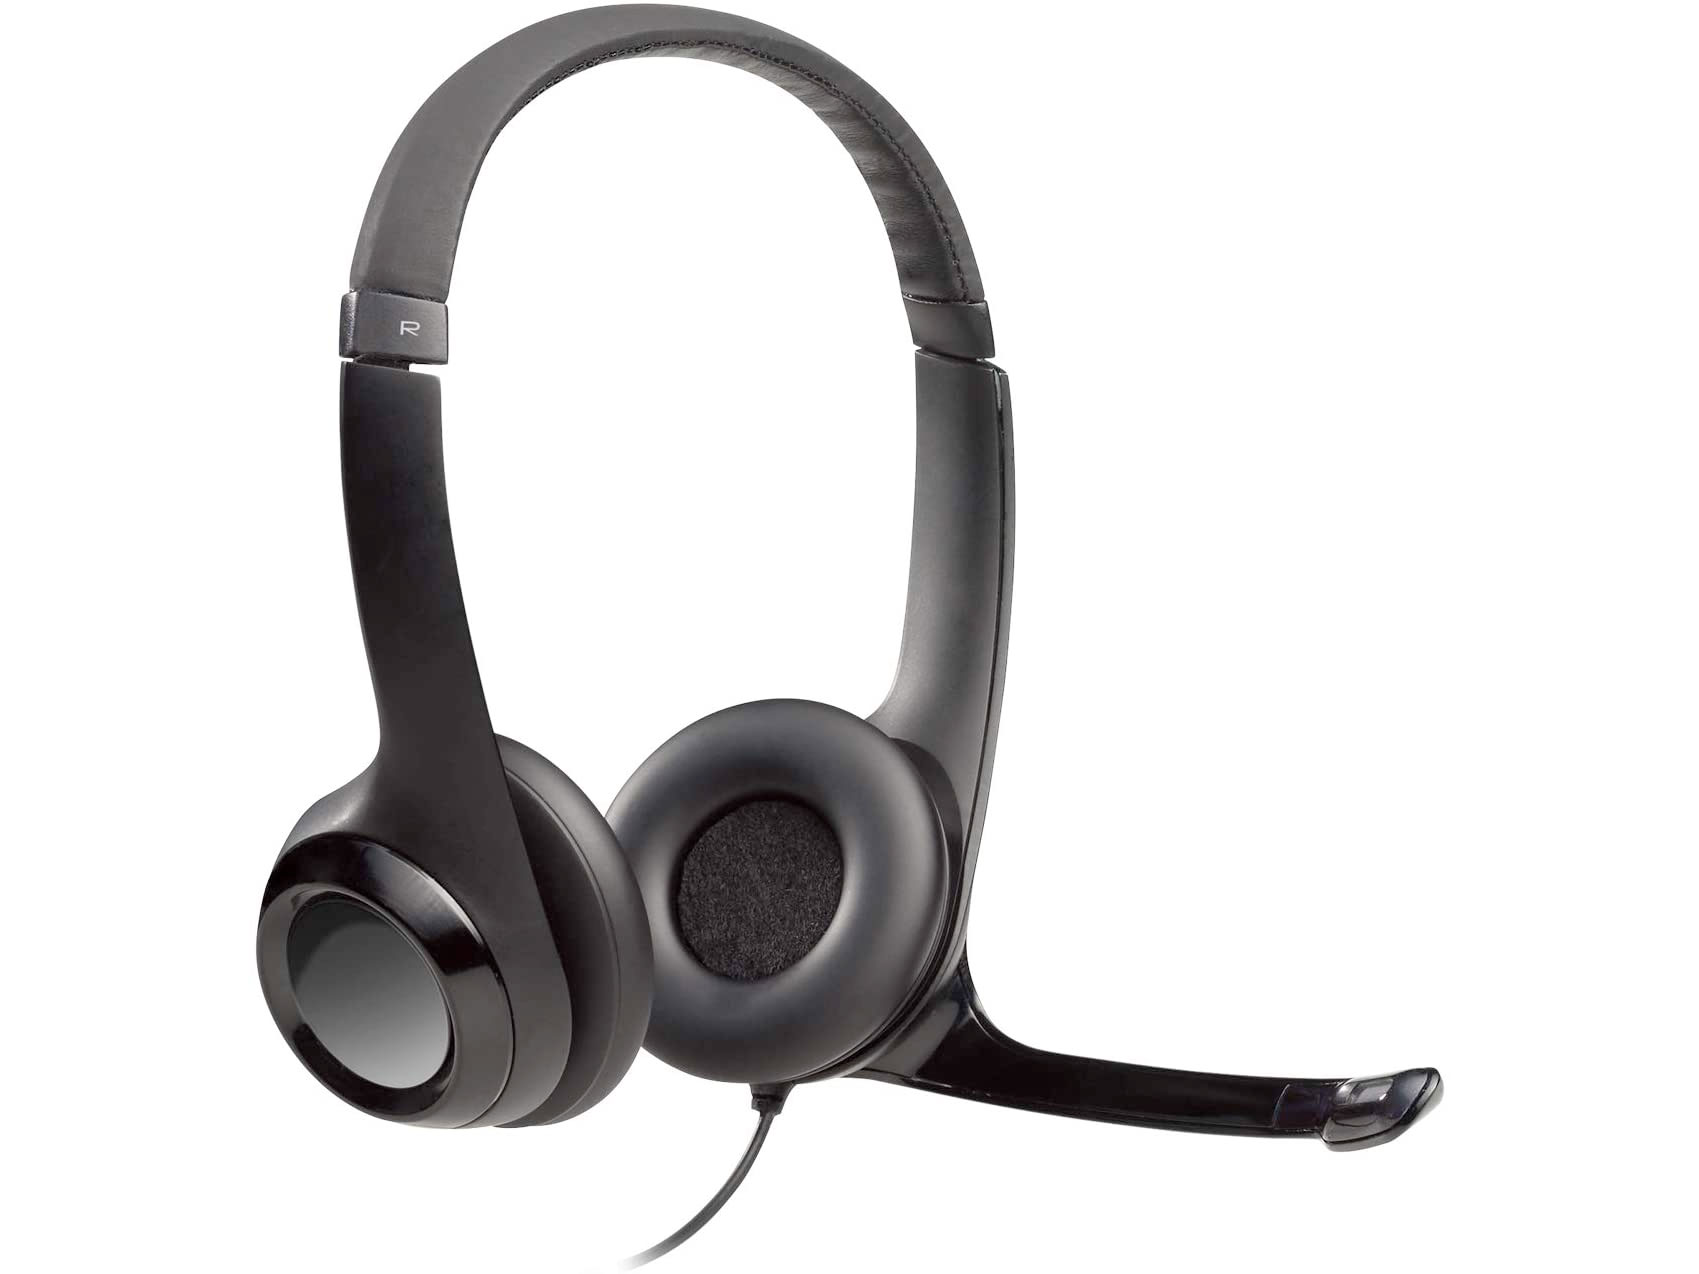 Amazon：Logitech USB Headset H390 with Noise Cancelling Mic只賣$29.99